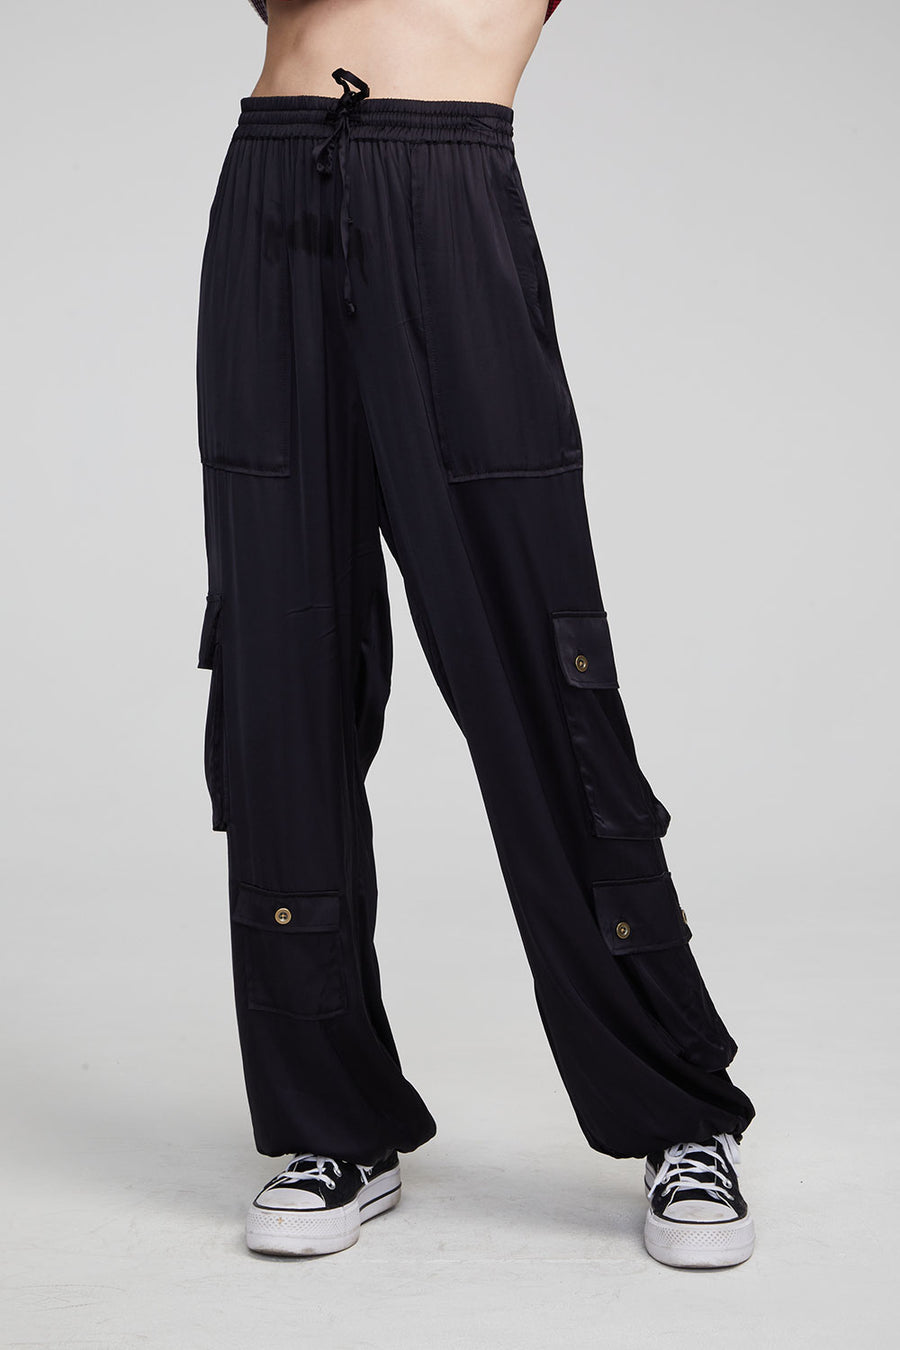 Billyy Shadow Black Trousers WOMENS chaserbrand